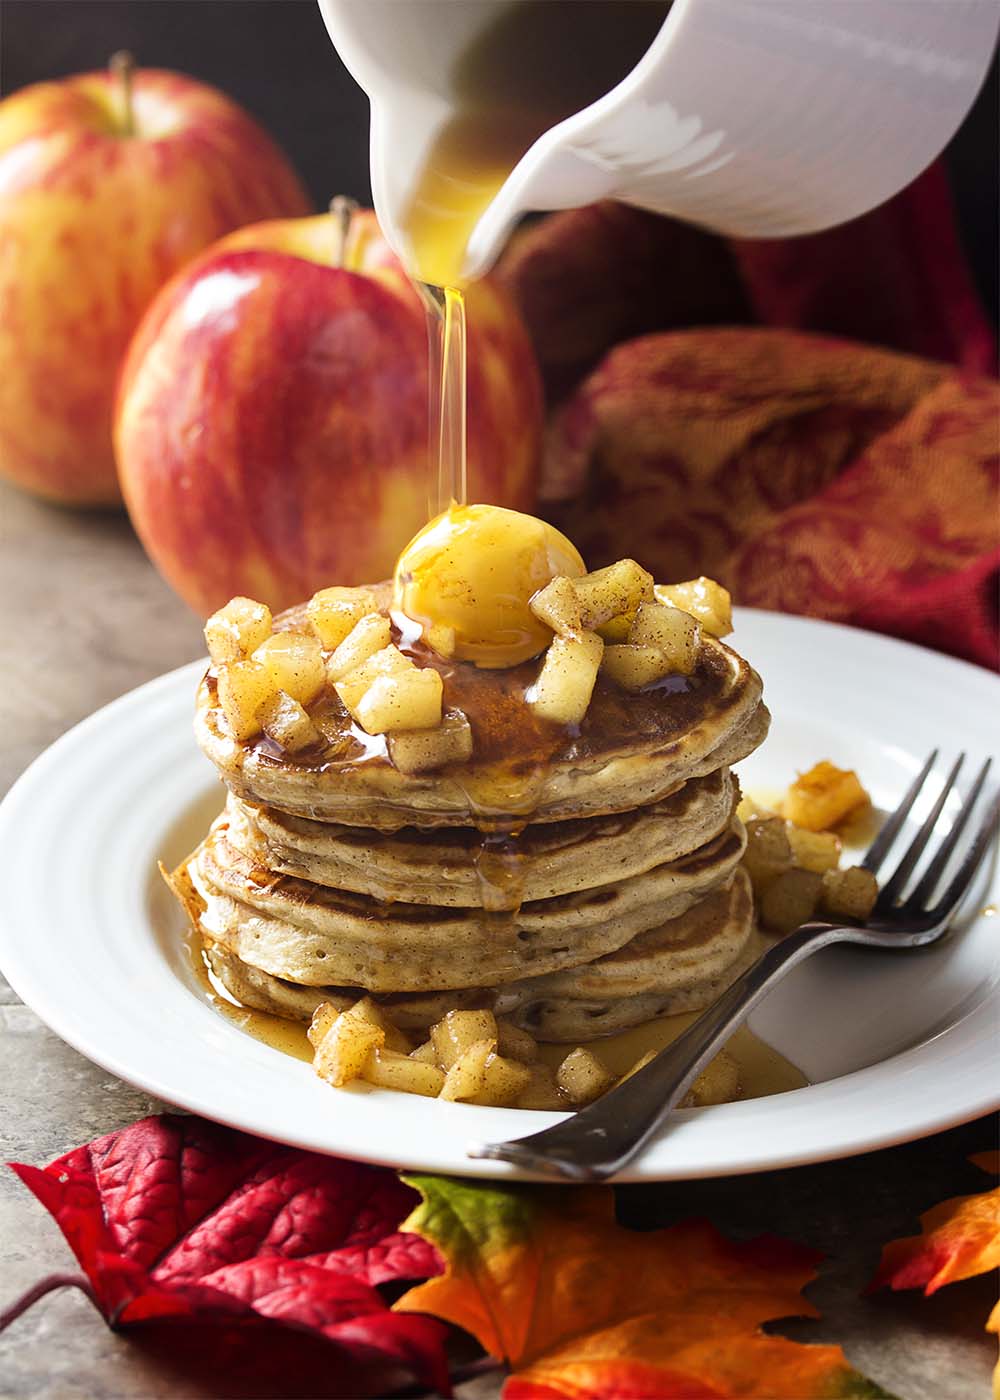 My favorite sour cream pancake batter is mixed with sauteed spiced apples in these apple cinnamon pancakes for the perfect fall and winter breakfast. | justalittlebitofbacon.com